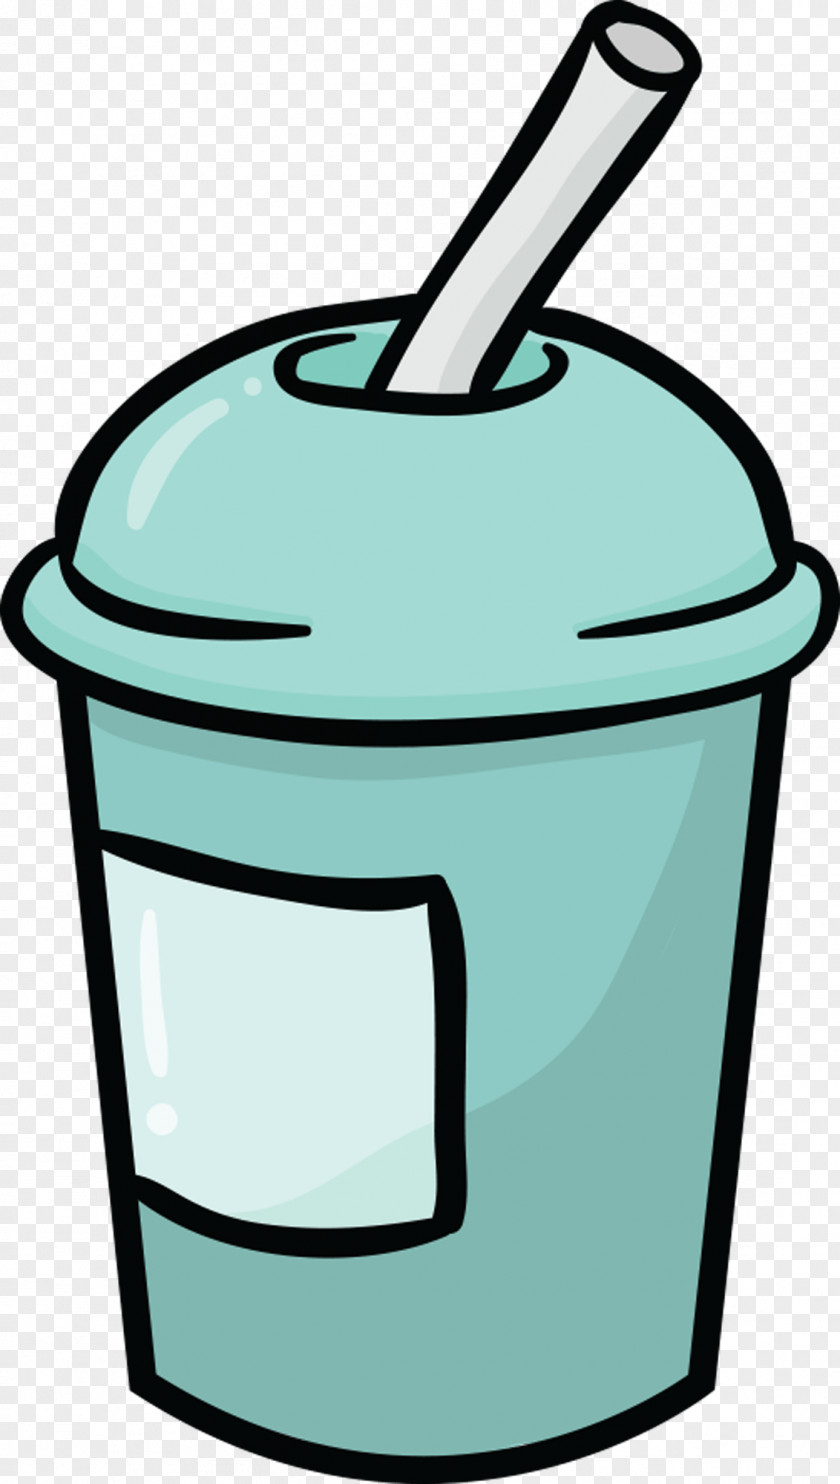 Milkshake Clipart Fizzy Drinks Smoothie Drinking Straw Cup Clip Art PNG